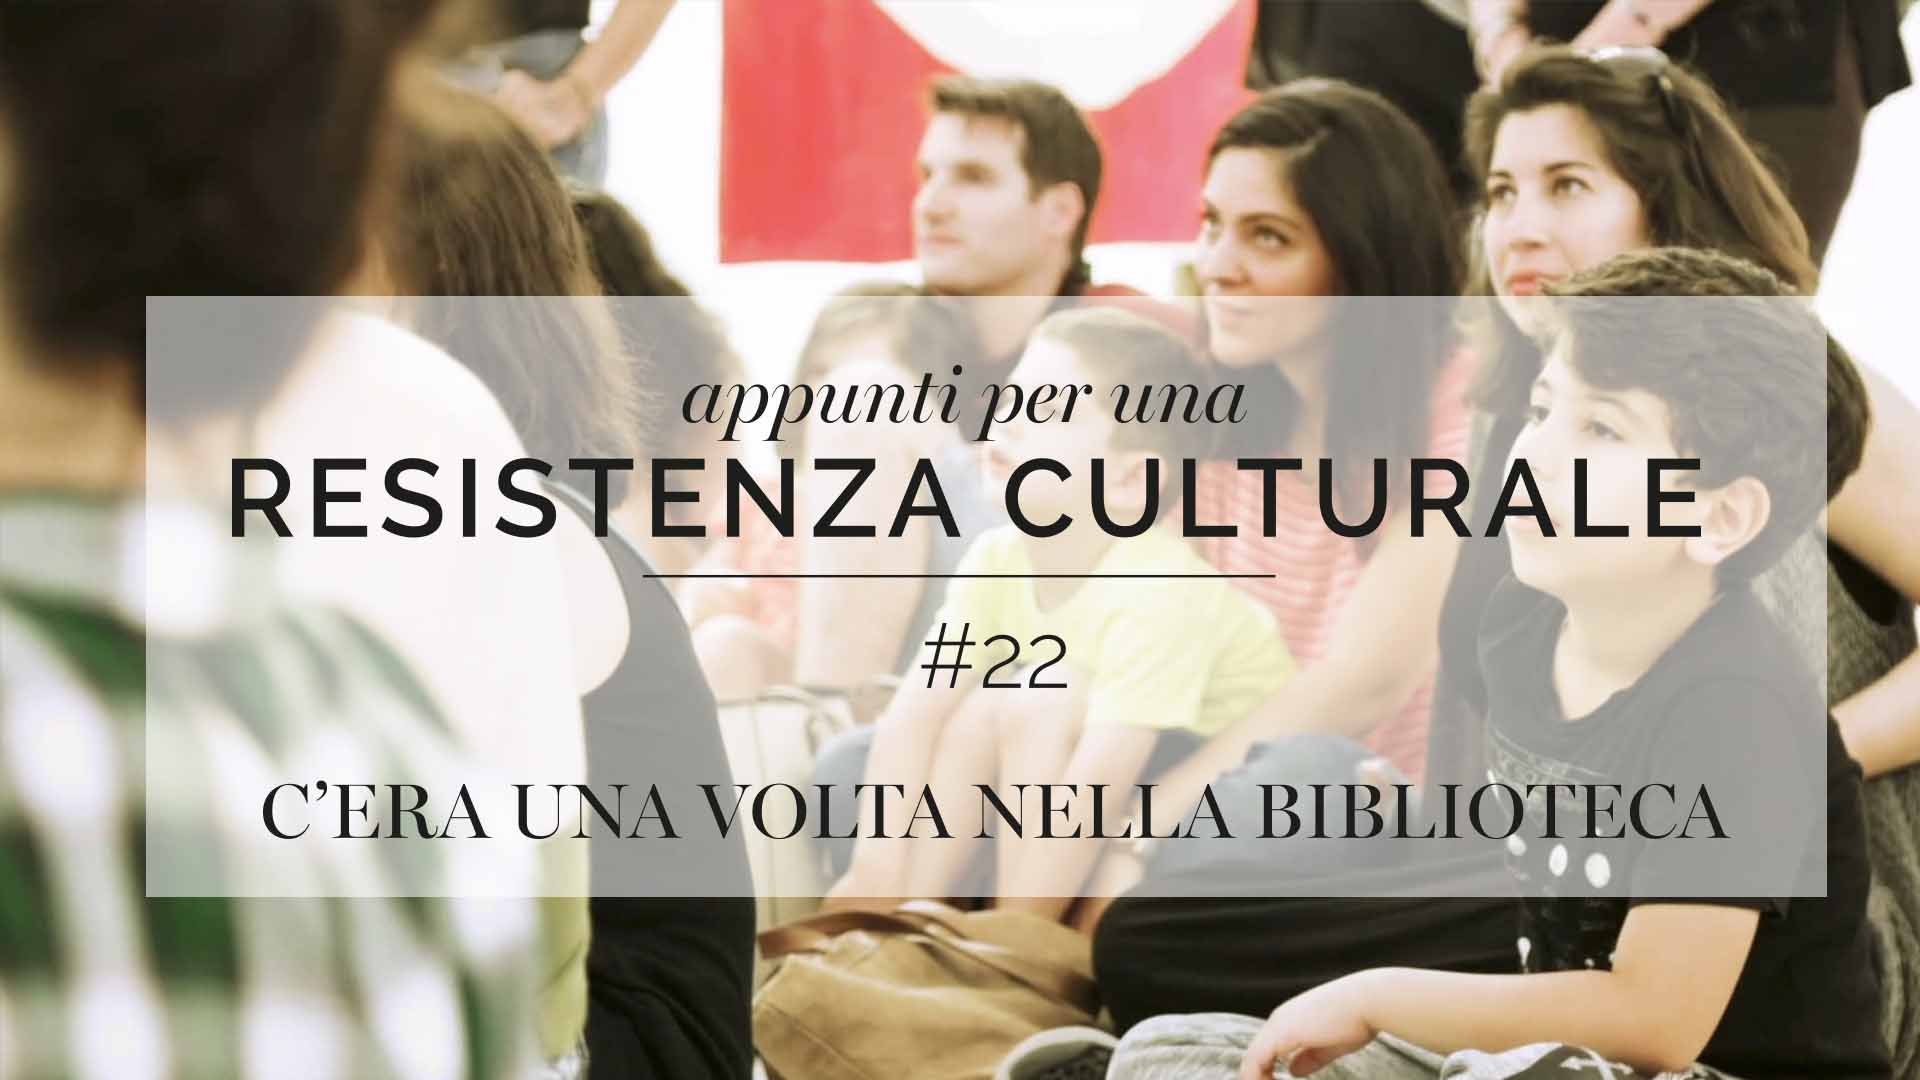 Appunti per una resistenza culturale #22<br>Once upon a time in the library